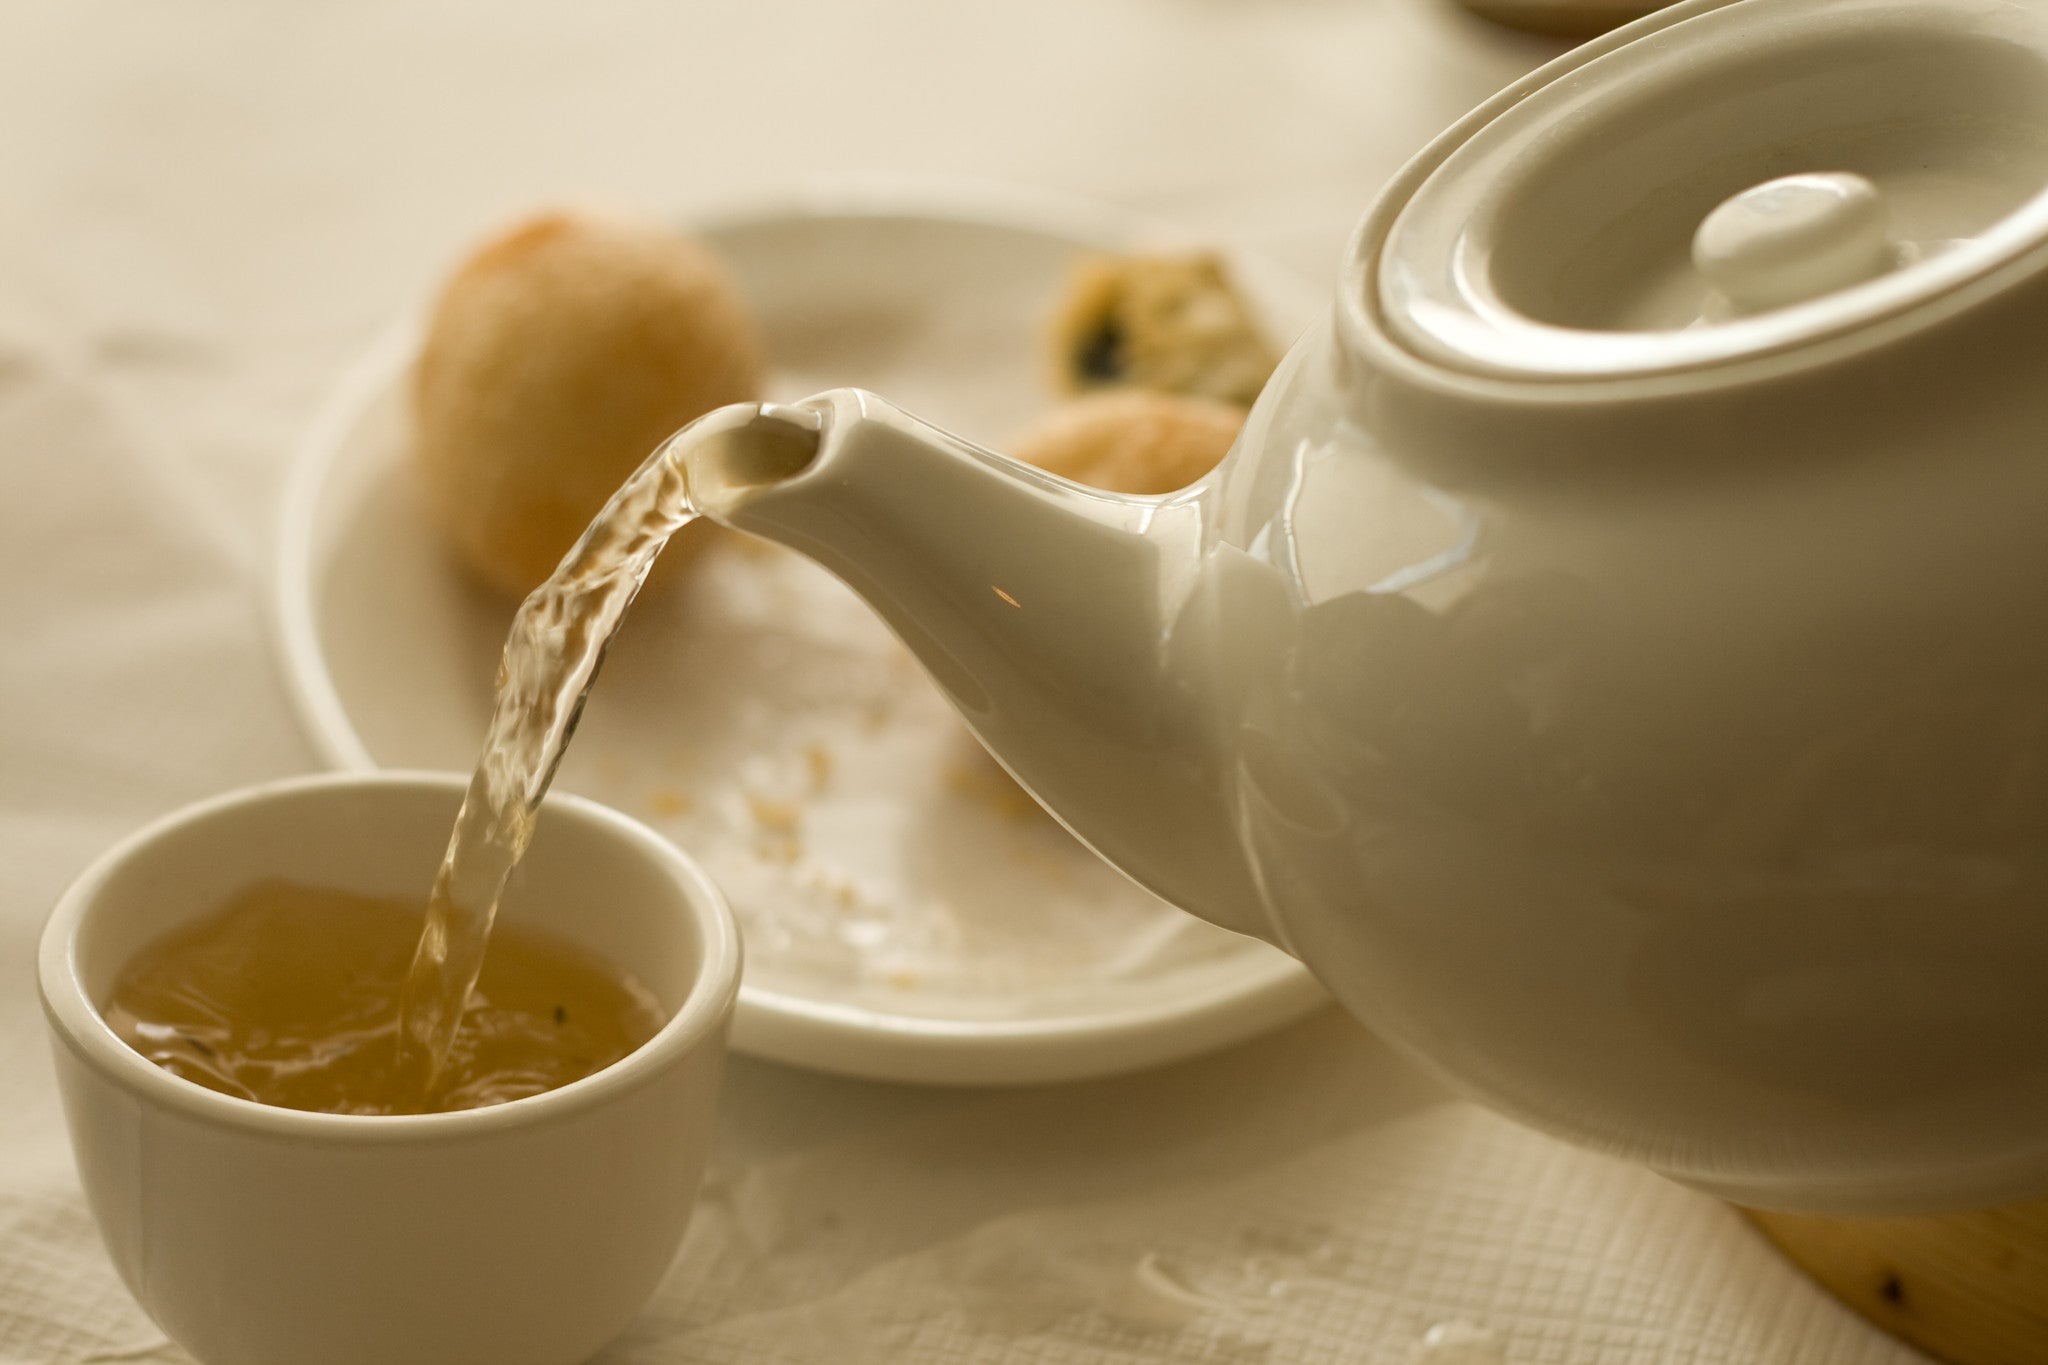 https://recipes.net/wp-content/uploads/2023/09/how-to-make-the-perfect-cup-of-tea-1695105673.jpg